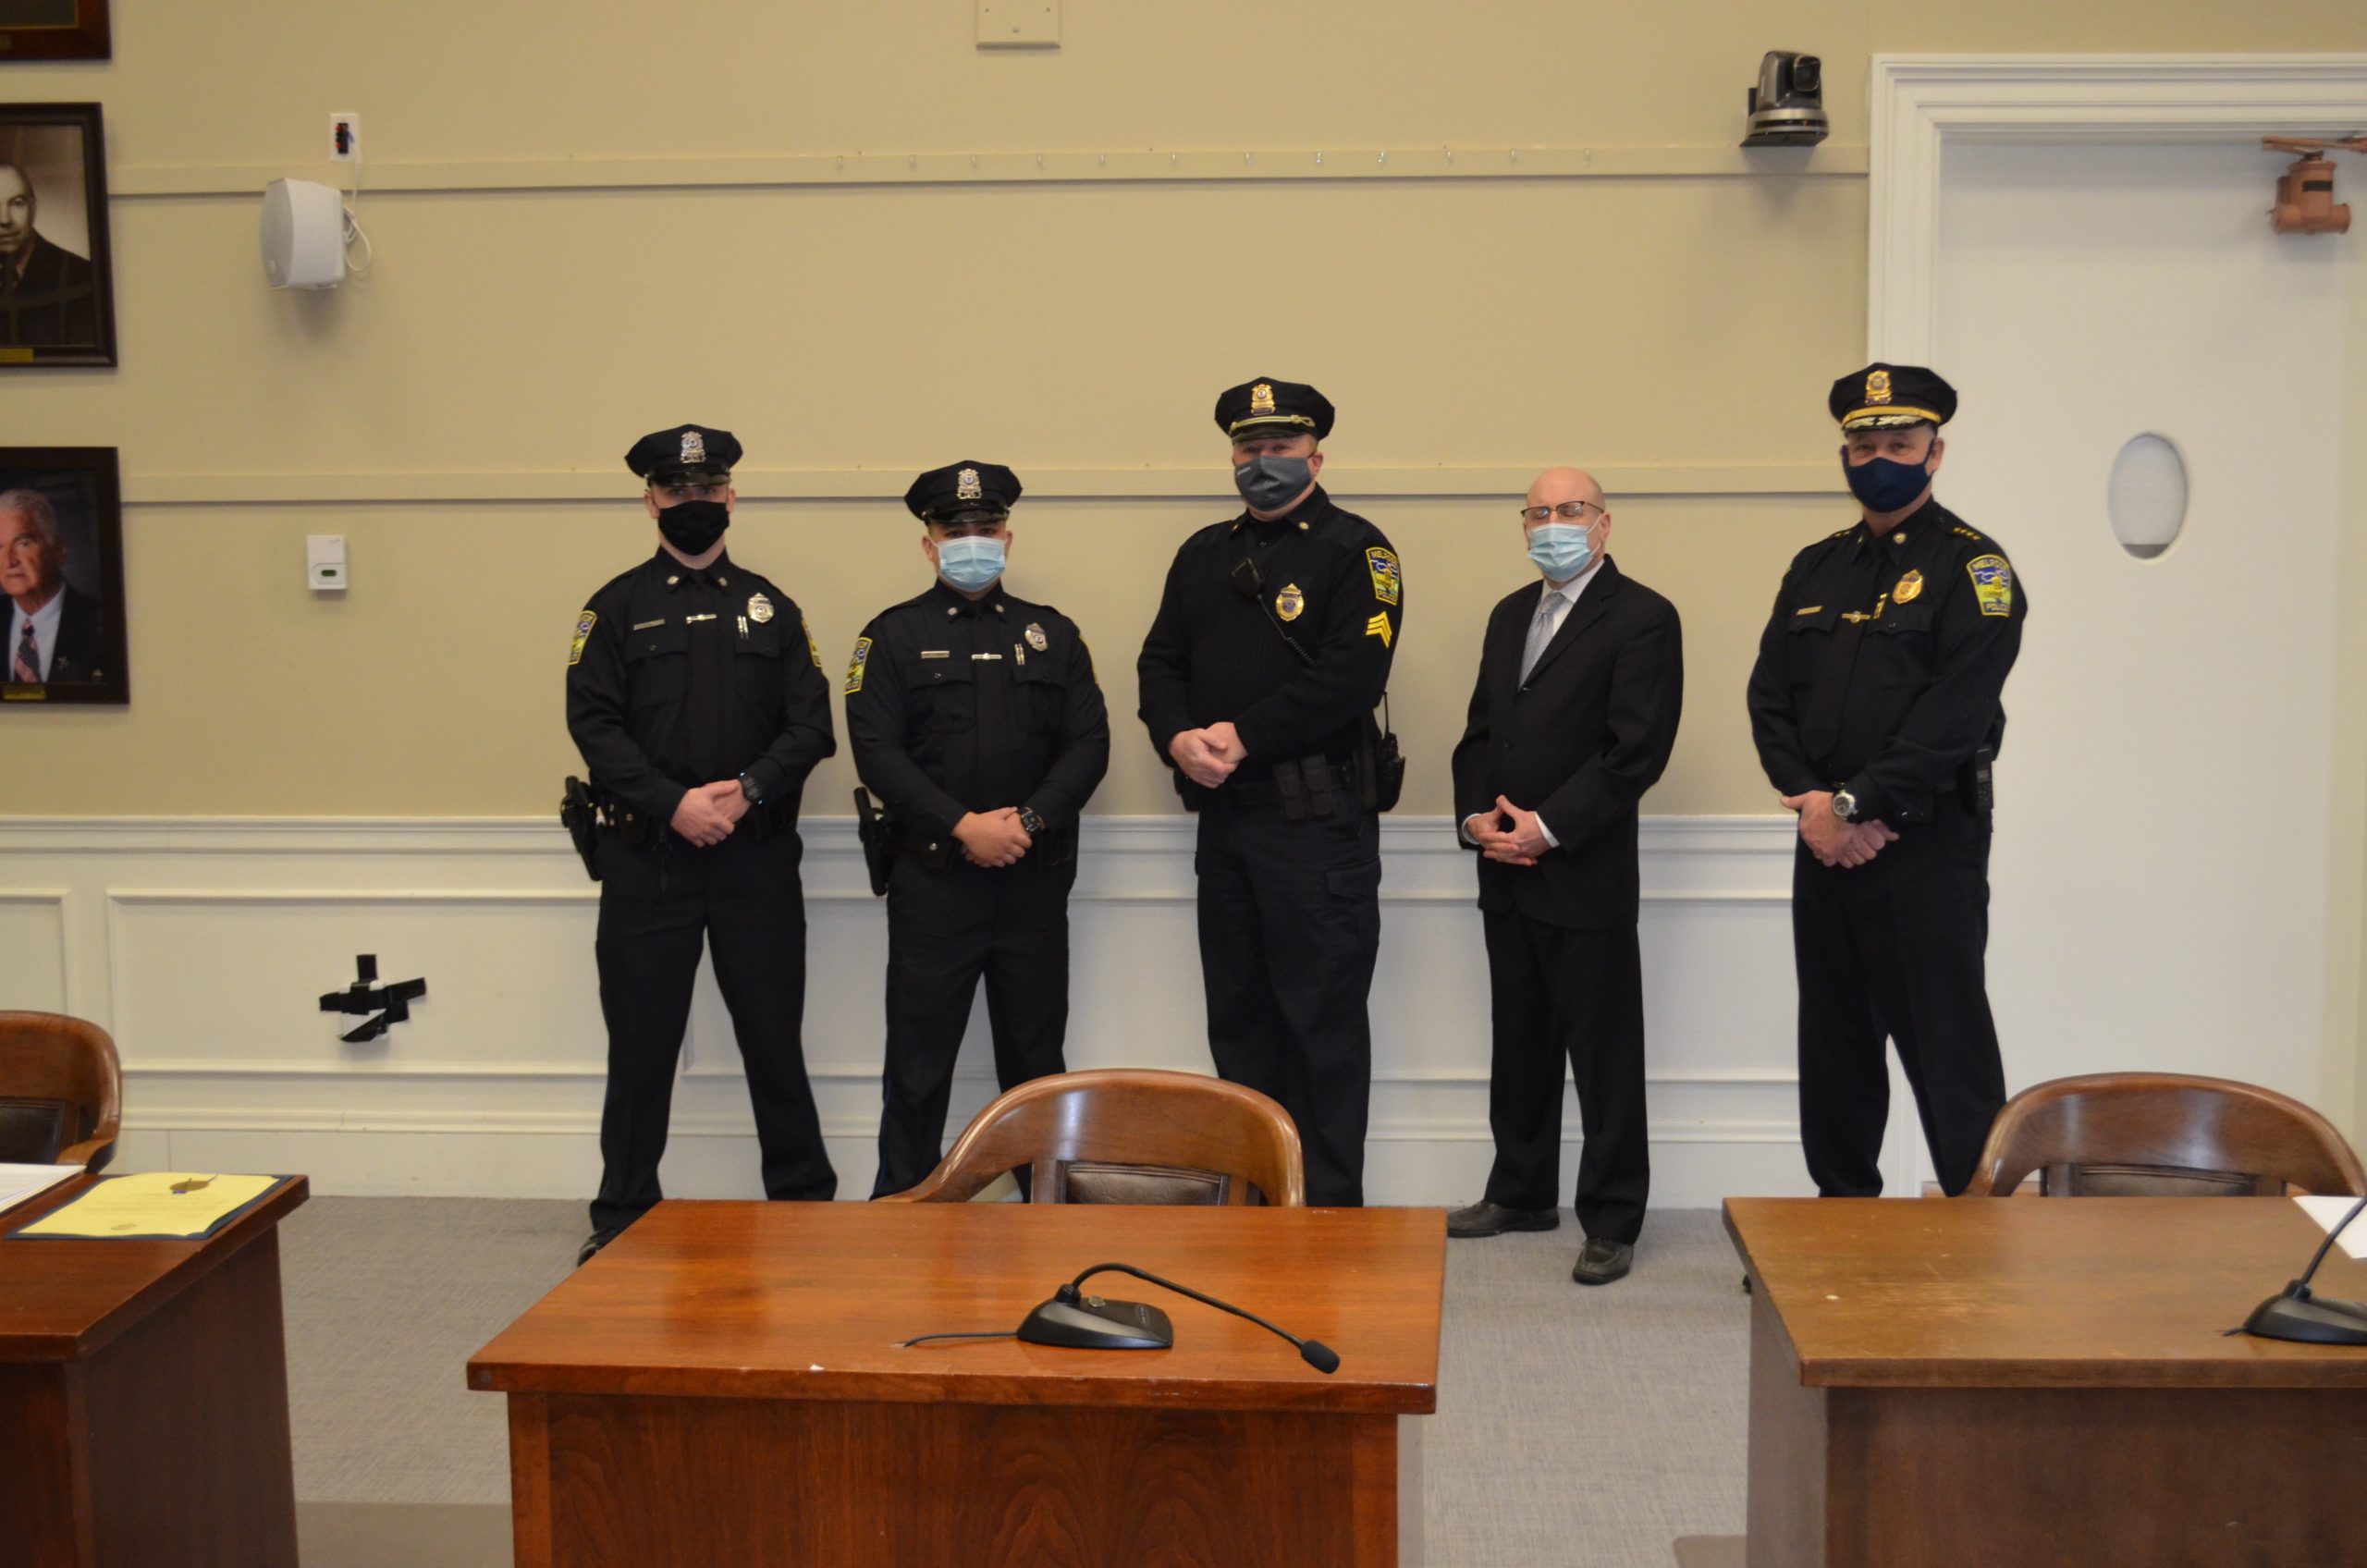 From left: Officer Andrew Ruby, Officer Thomas Grant, Sgt. Michael Lynch, Mayor Paul Brodeur and Chief Michael L. Lyle. (Photo courtesy of the Melrose Police Department)